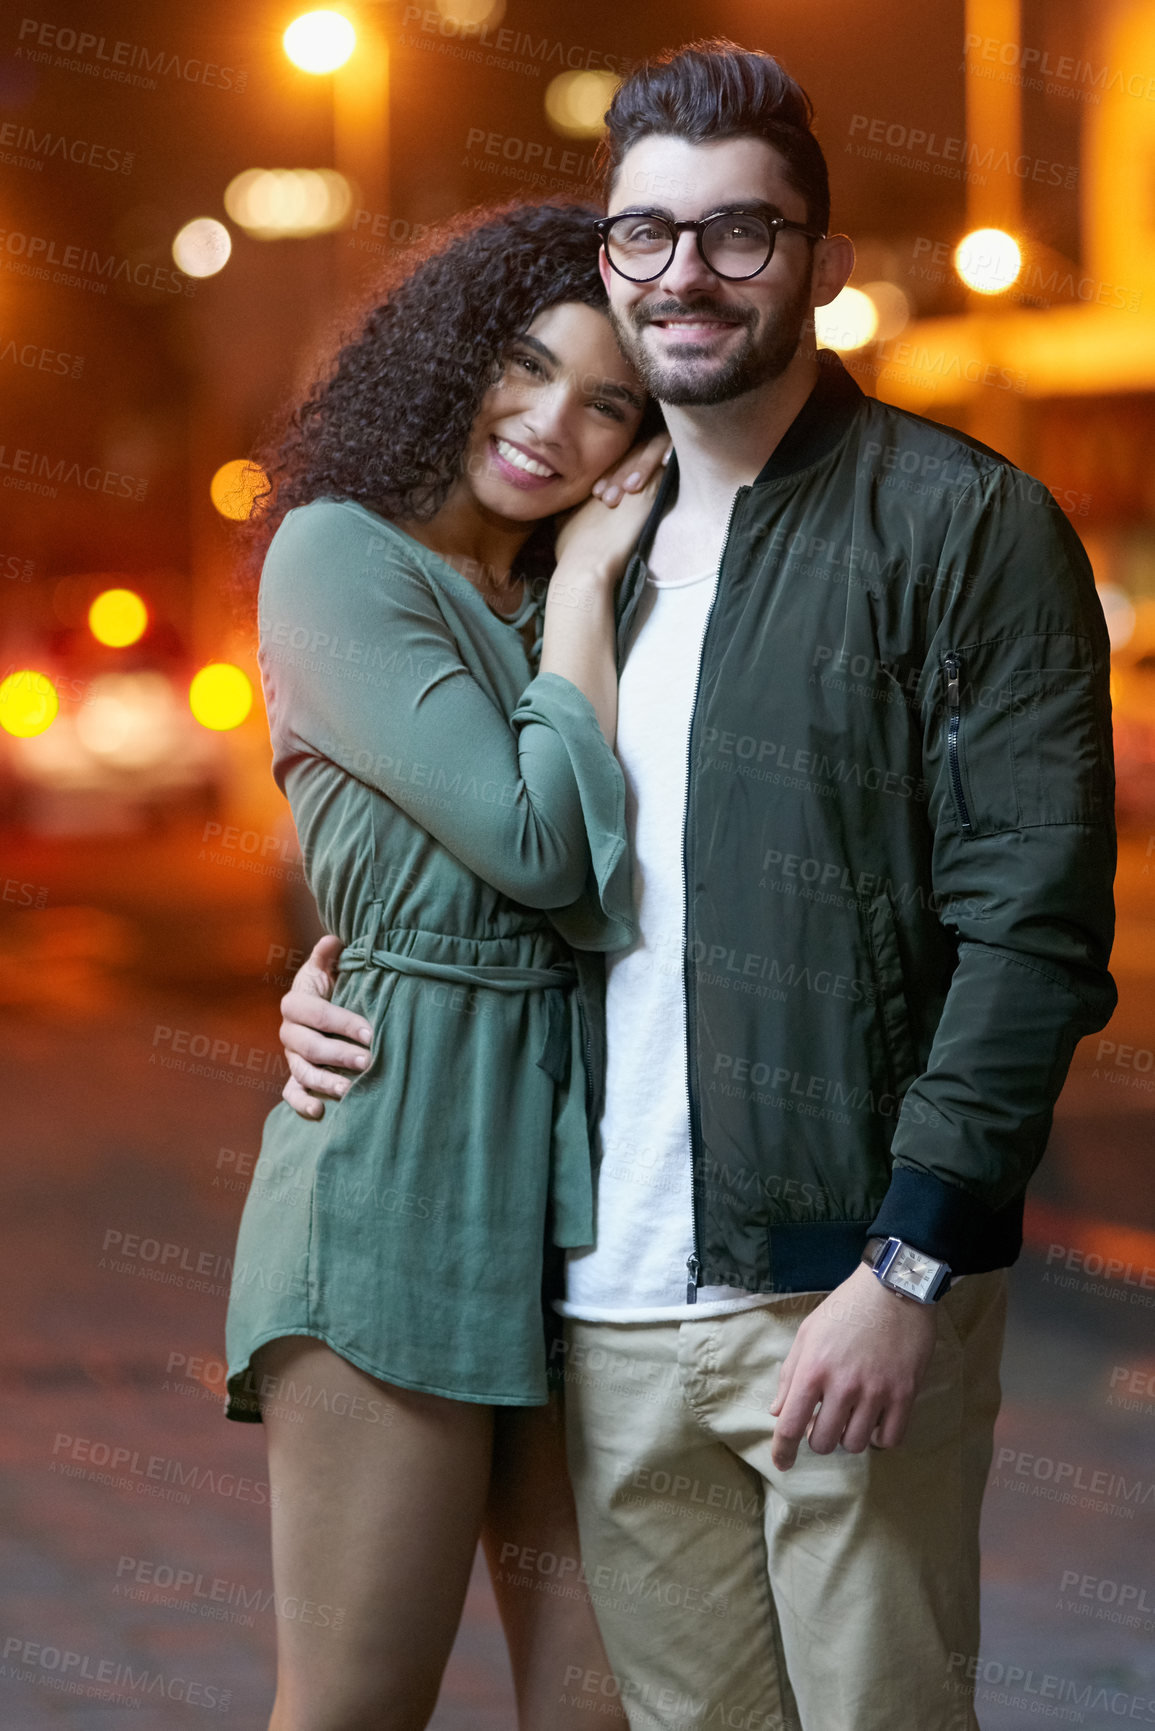 Buy stock photo Portrait of a happy young couple outdoors at night